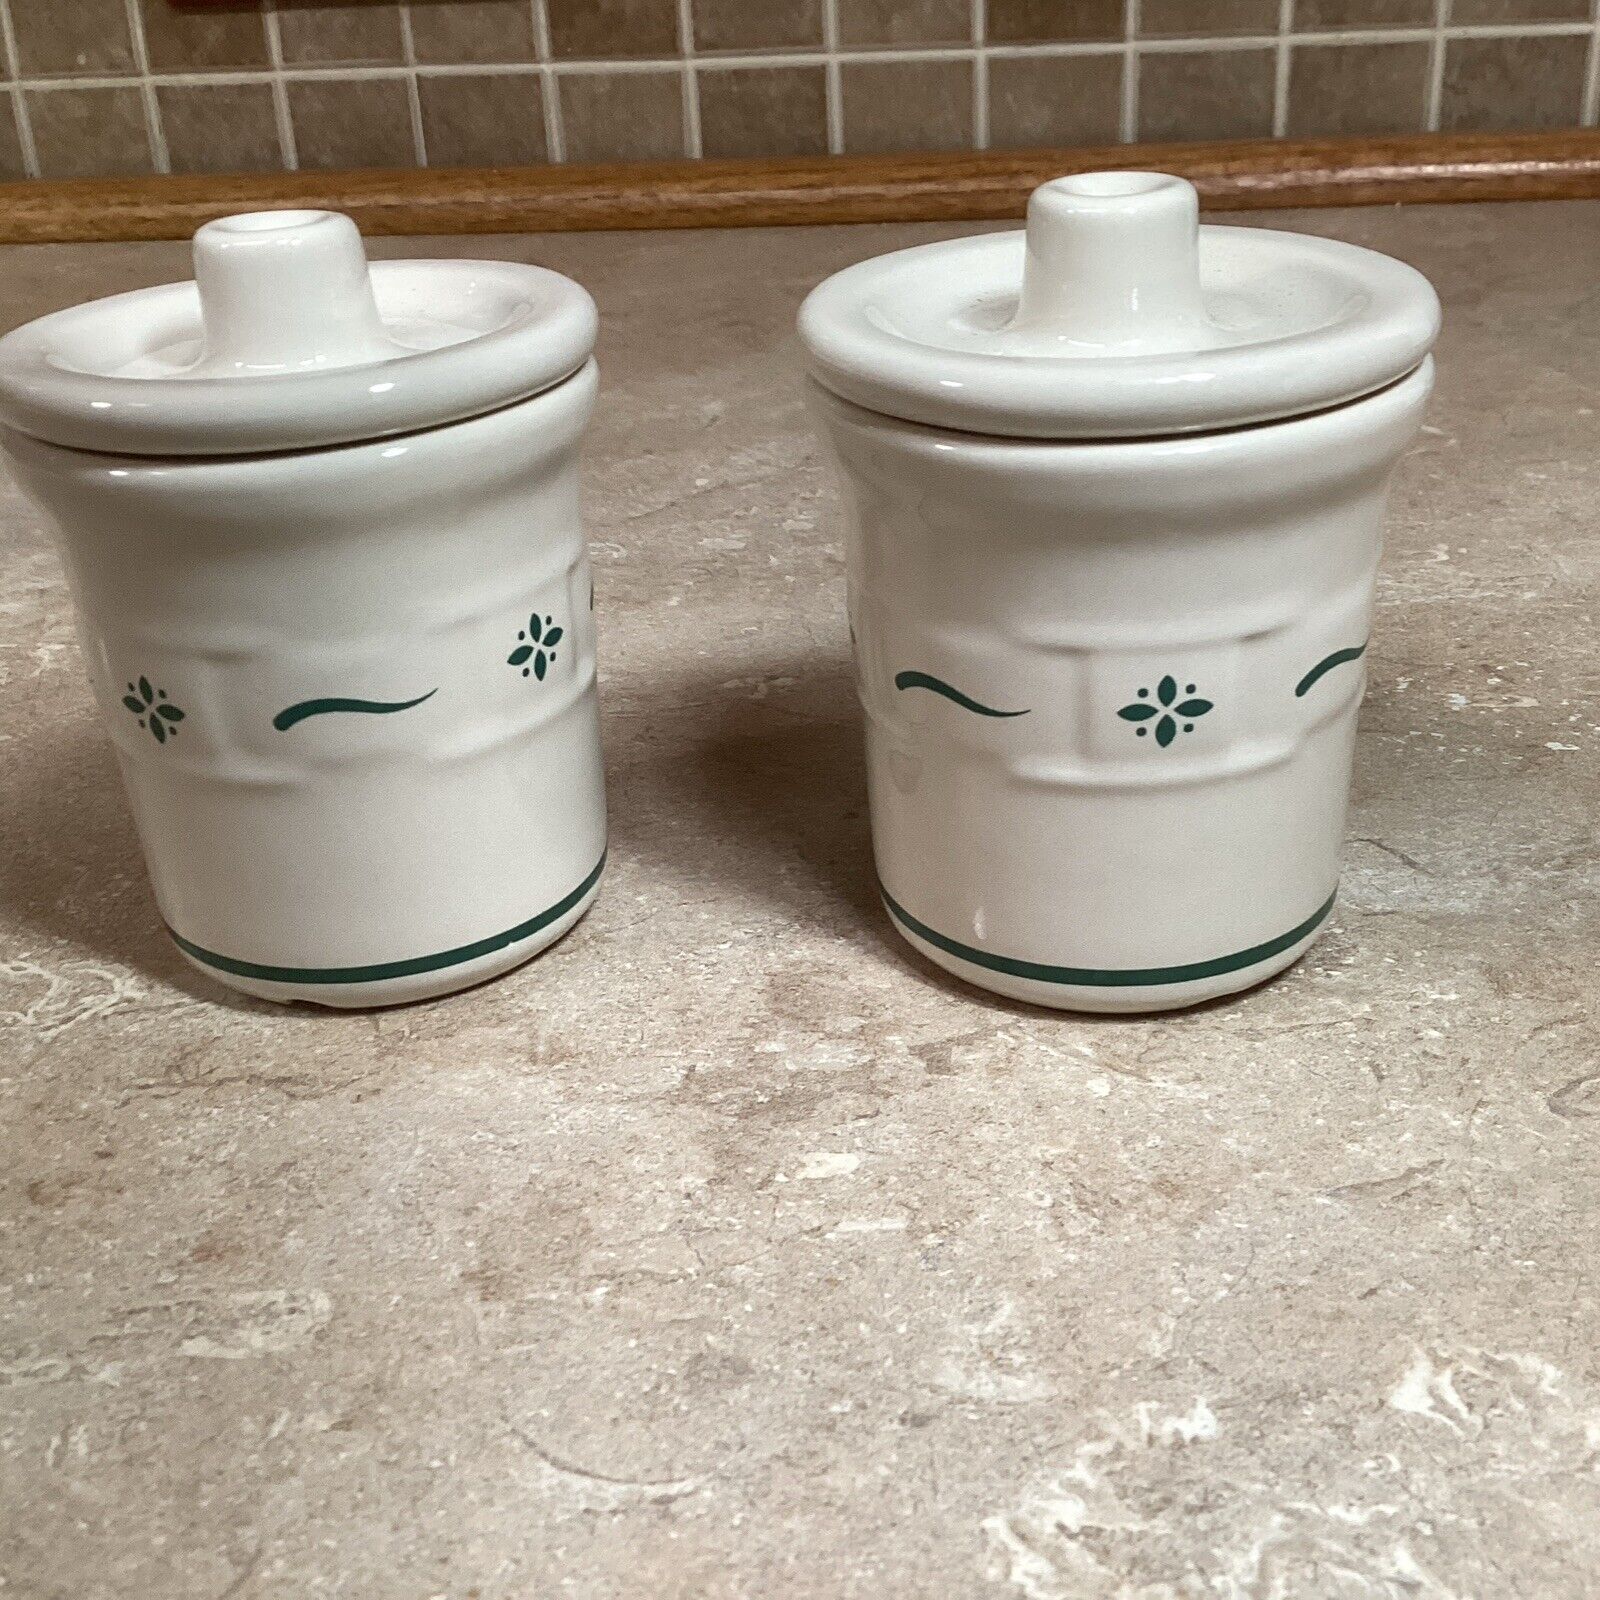 Longaberger Pottery Set Of 2 Condiment Crocks with Lids Woven Traditions GREEN